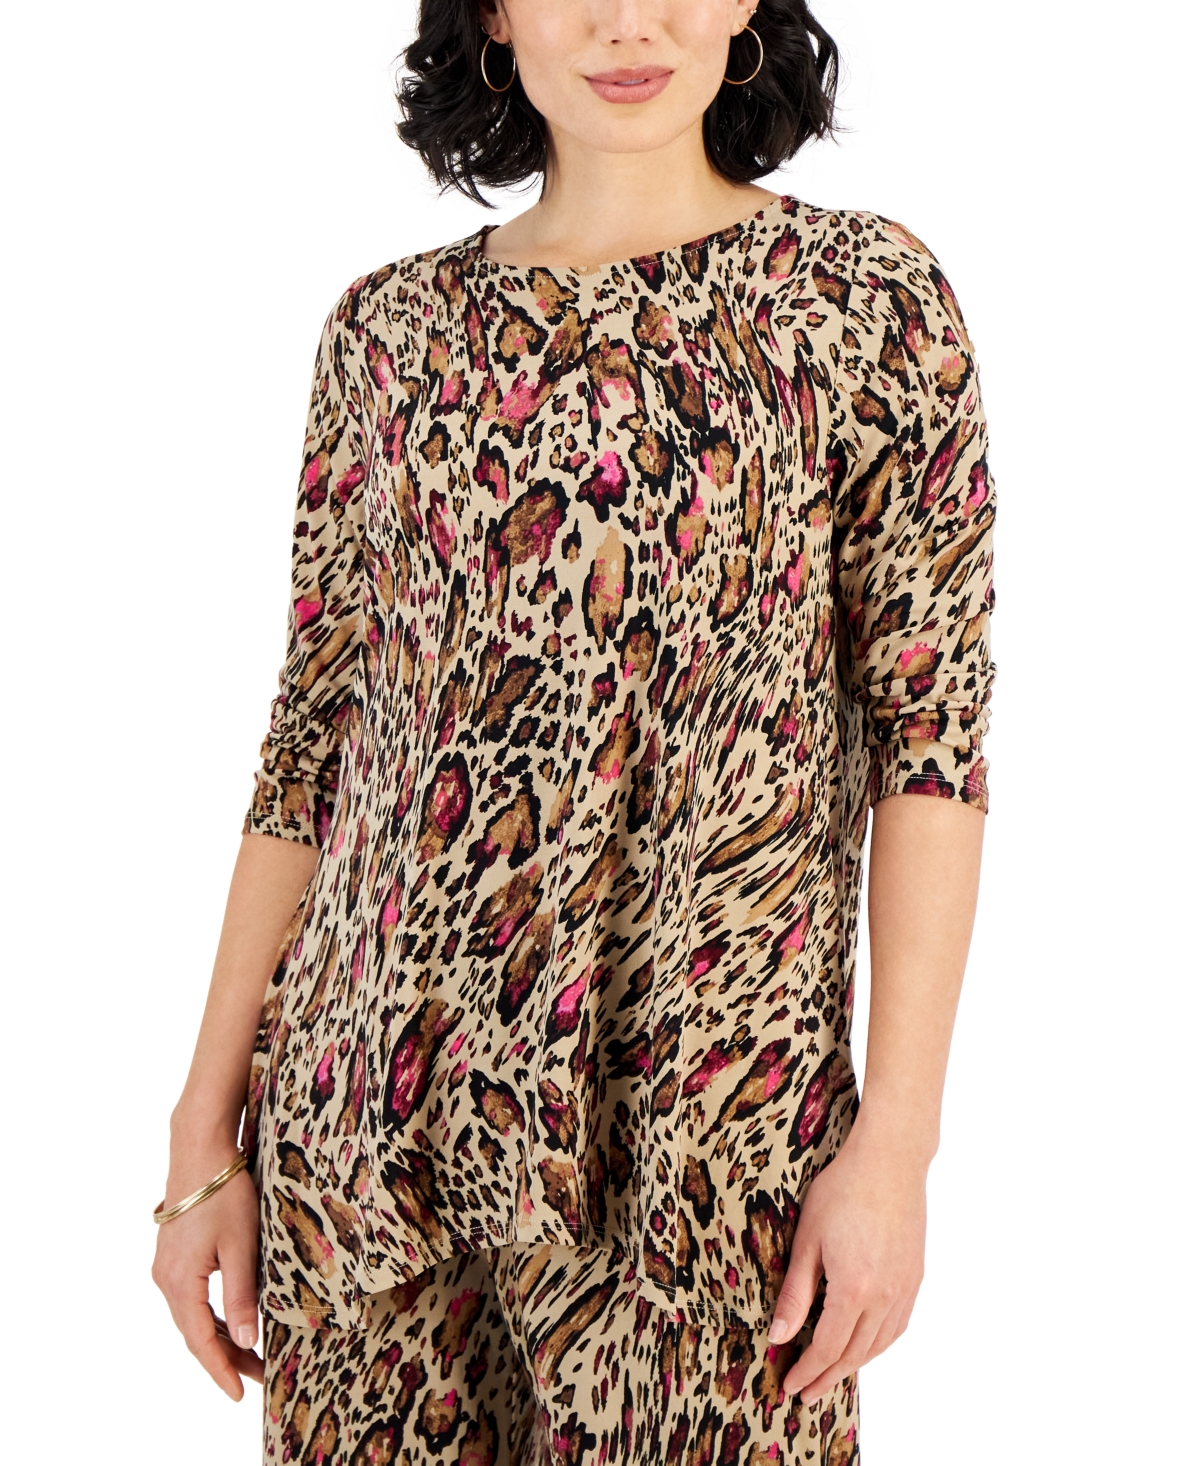 Petite Glam Animal-Print Top, Created for Macy's - New Fawn Combo